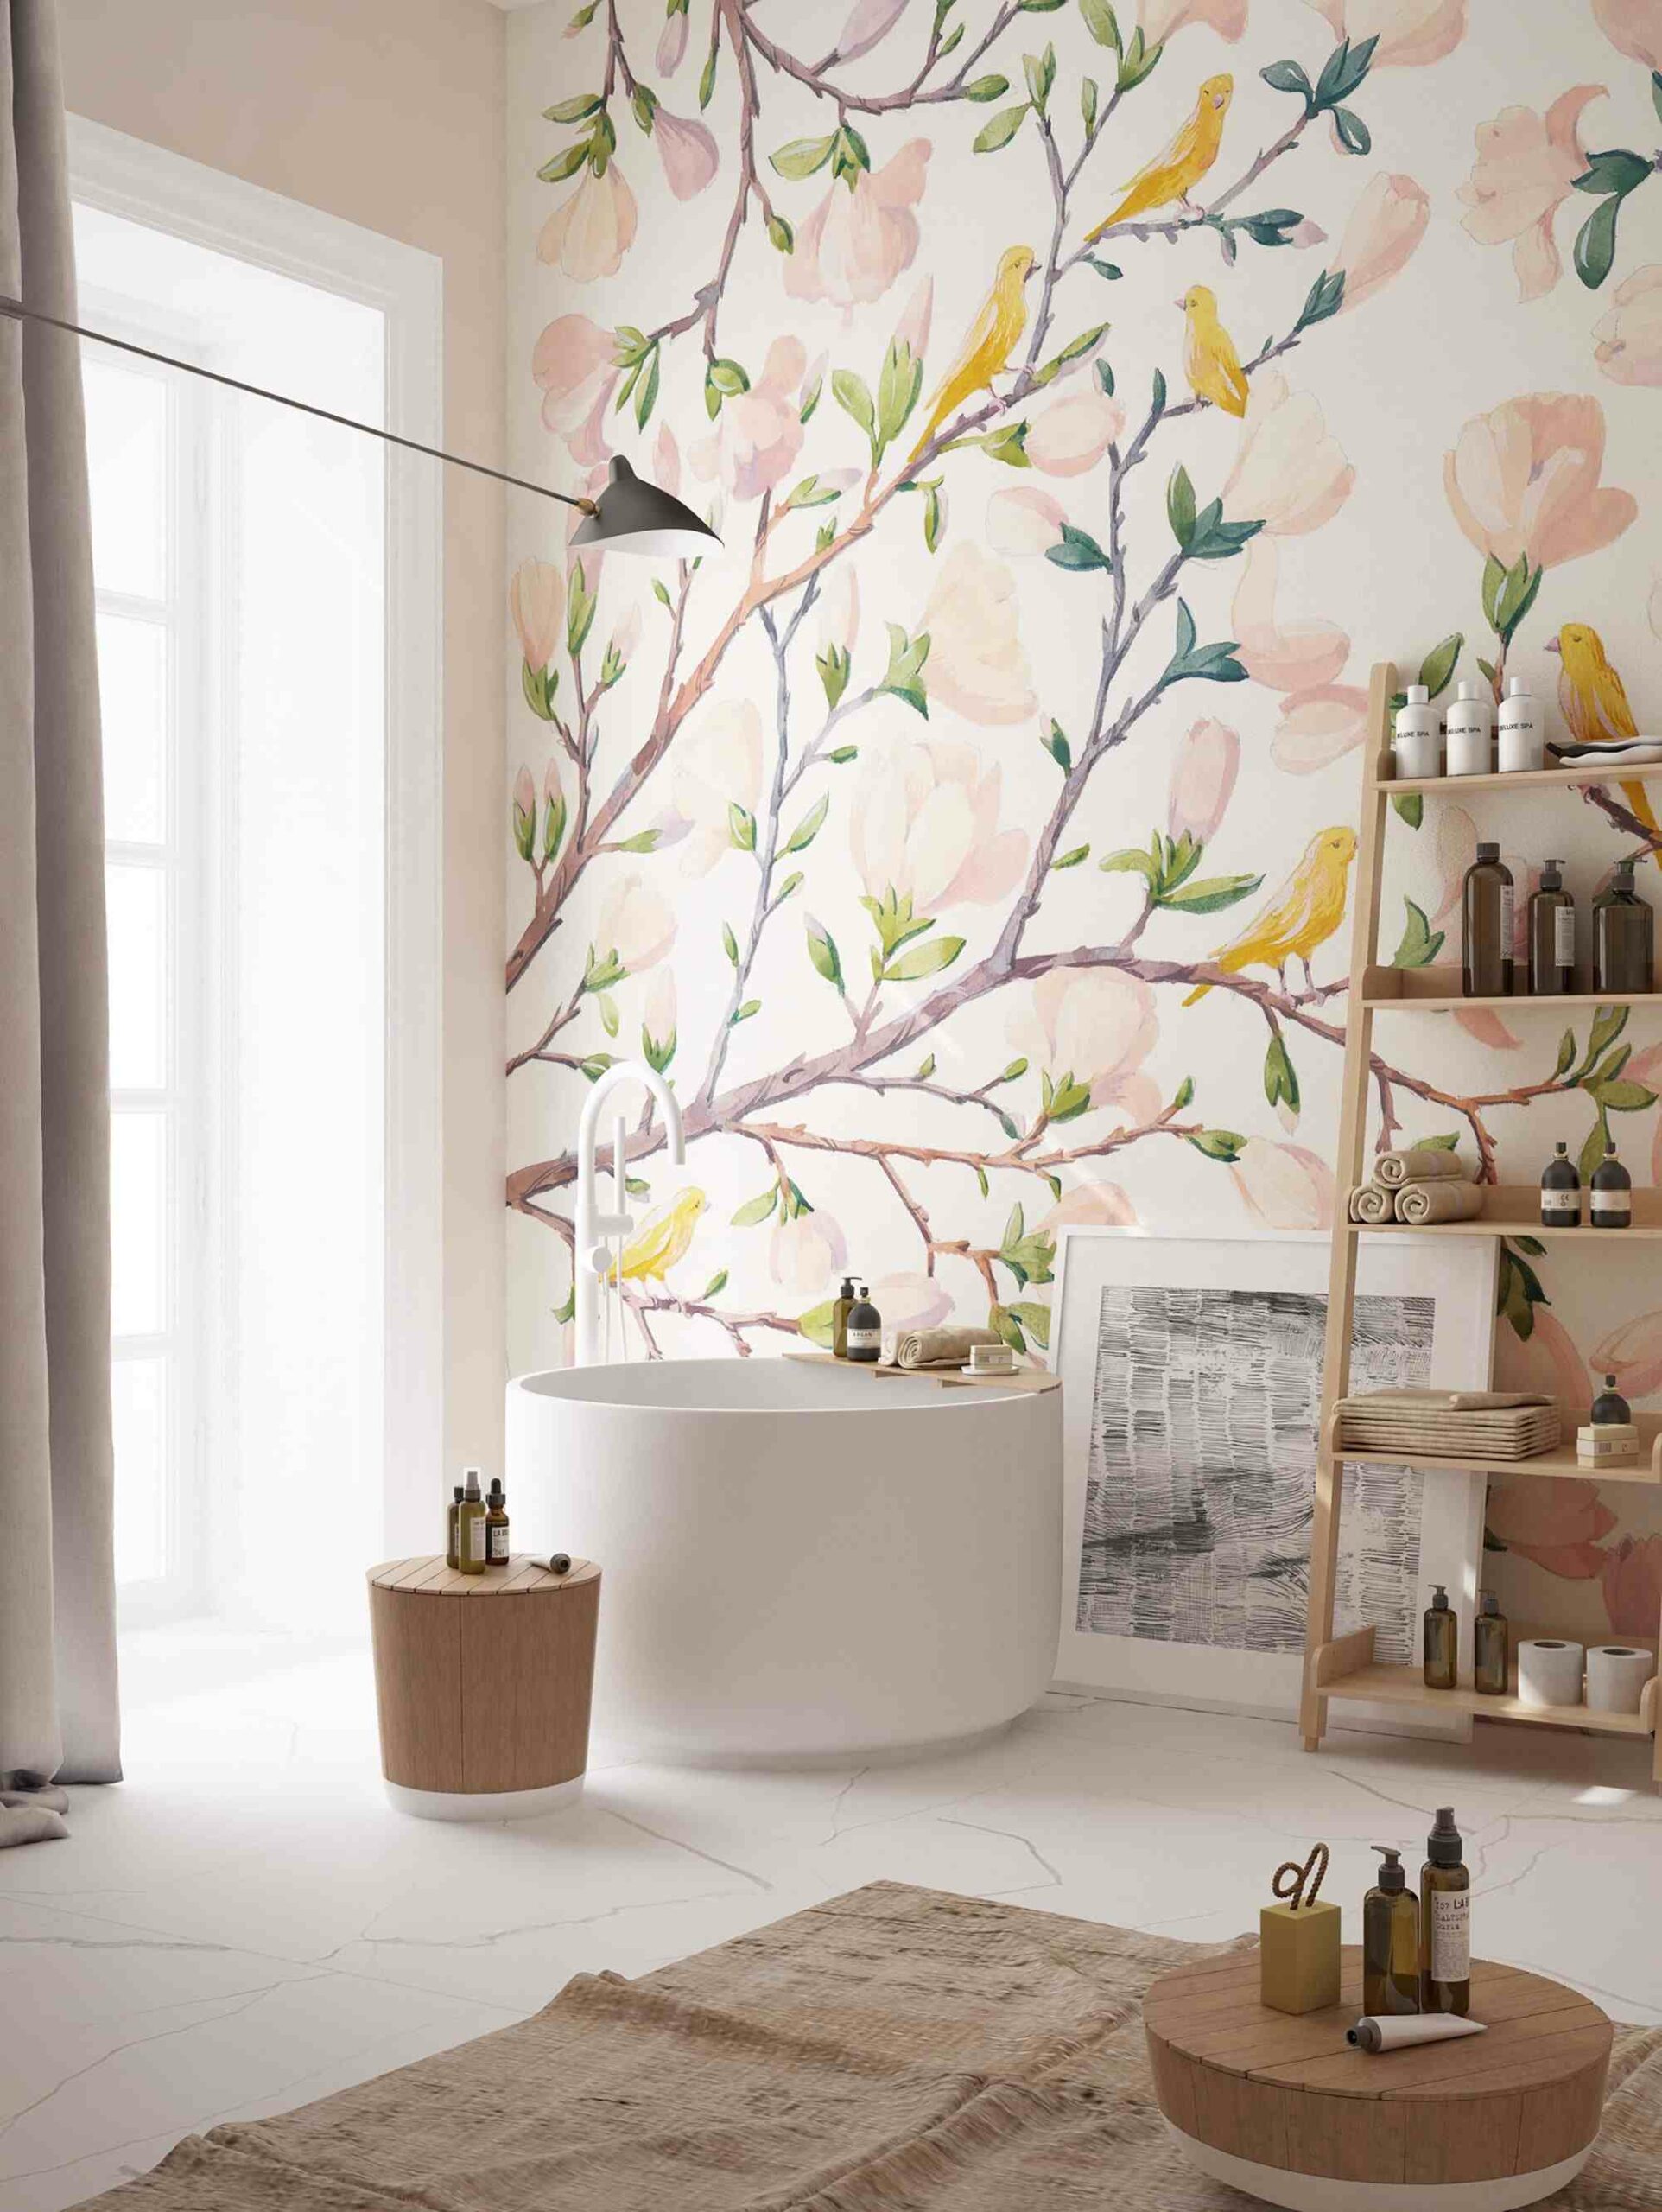 white bathtub, table, shelf, pretty floral wallpaper, rug and a painting